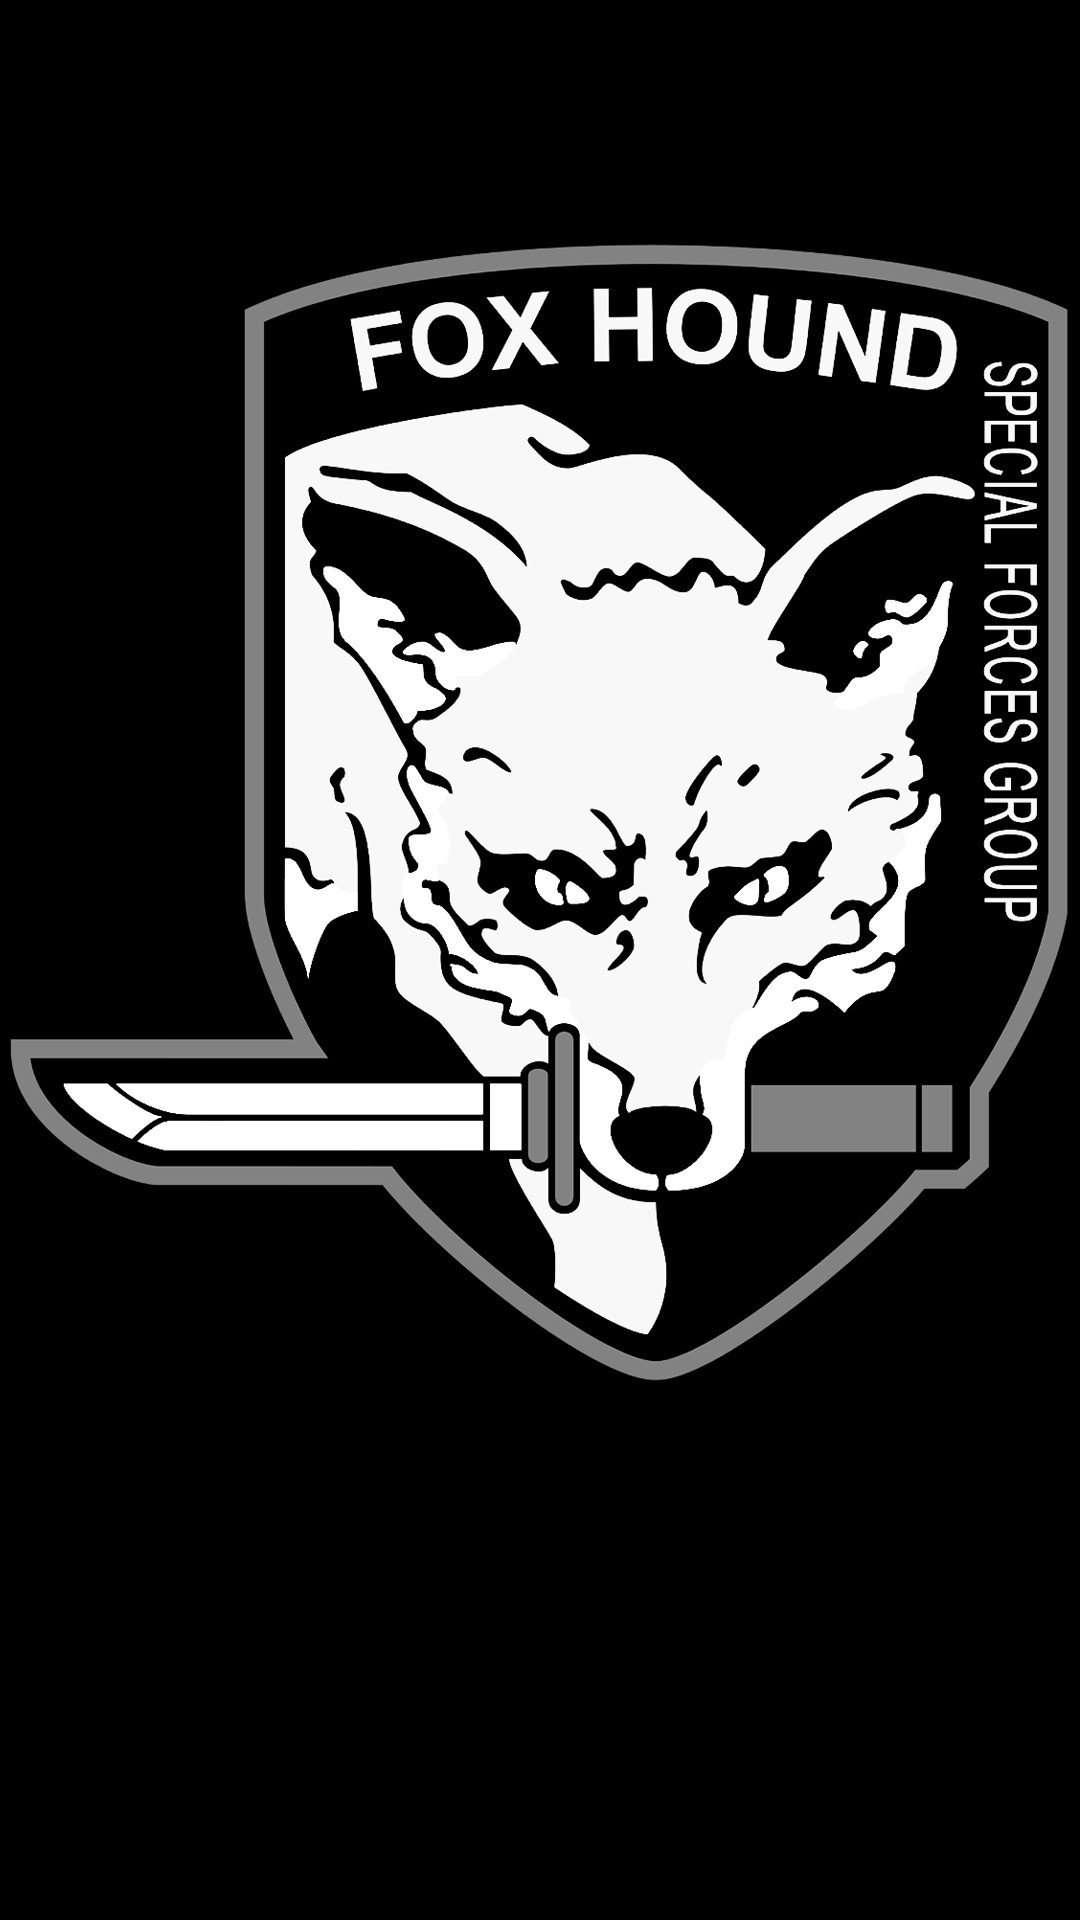 Fox Hound Metal Gear Solid Iphone Wallpapers